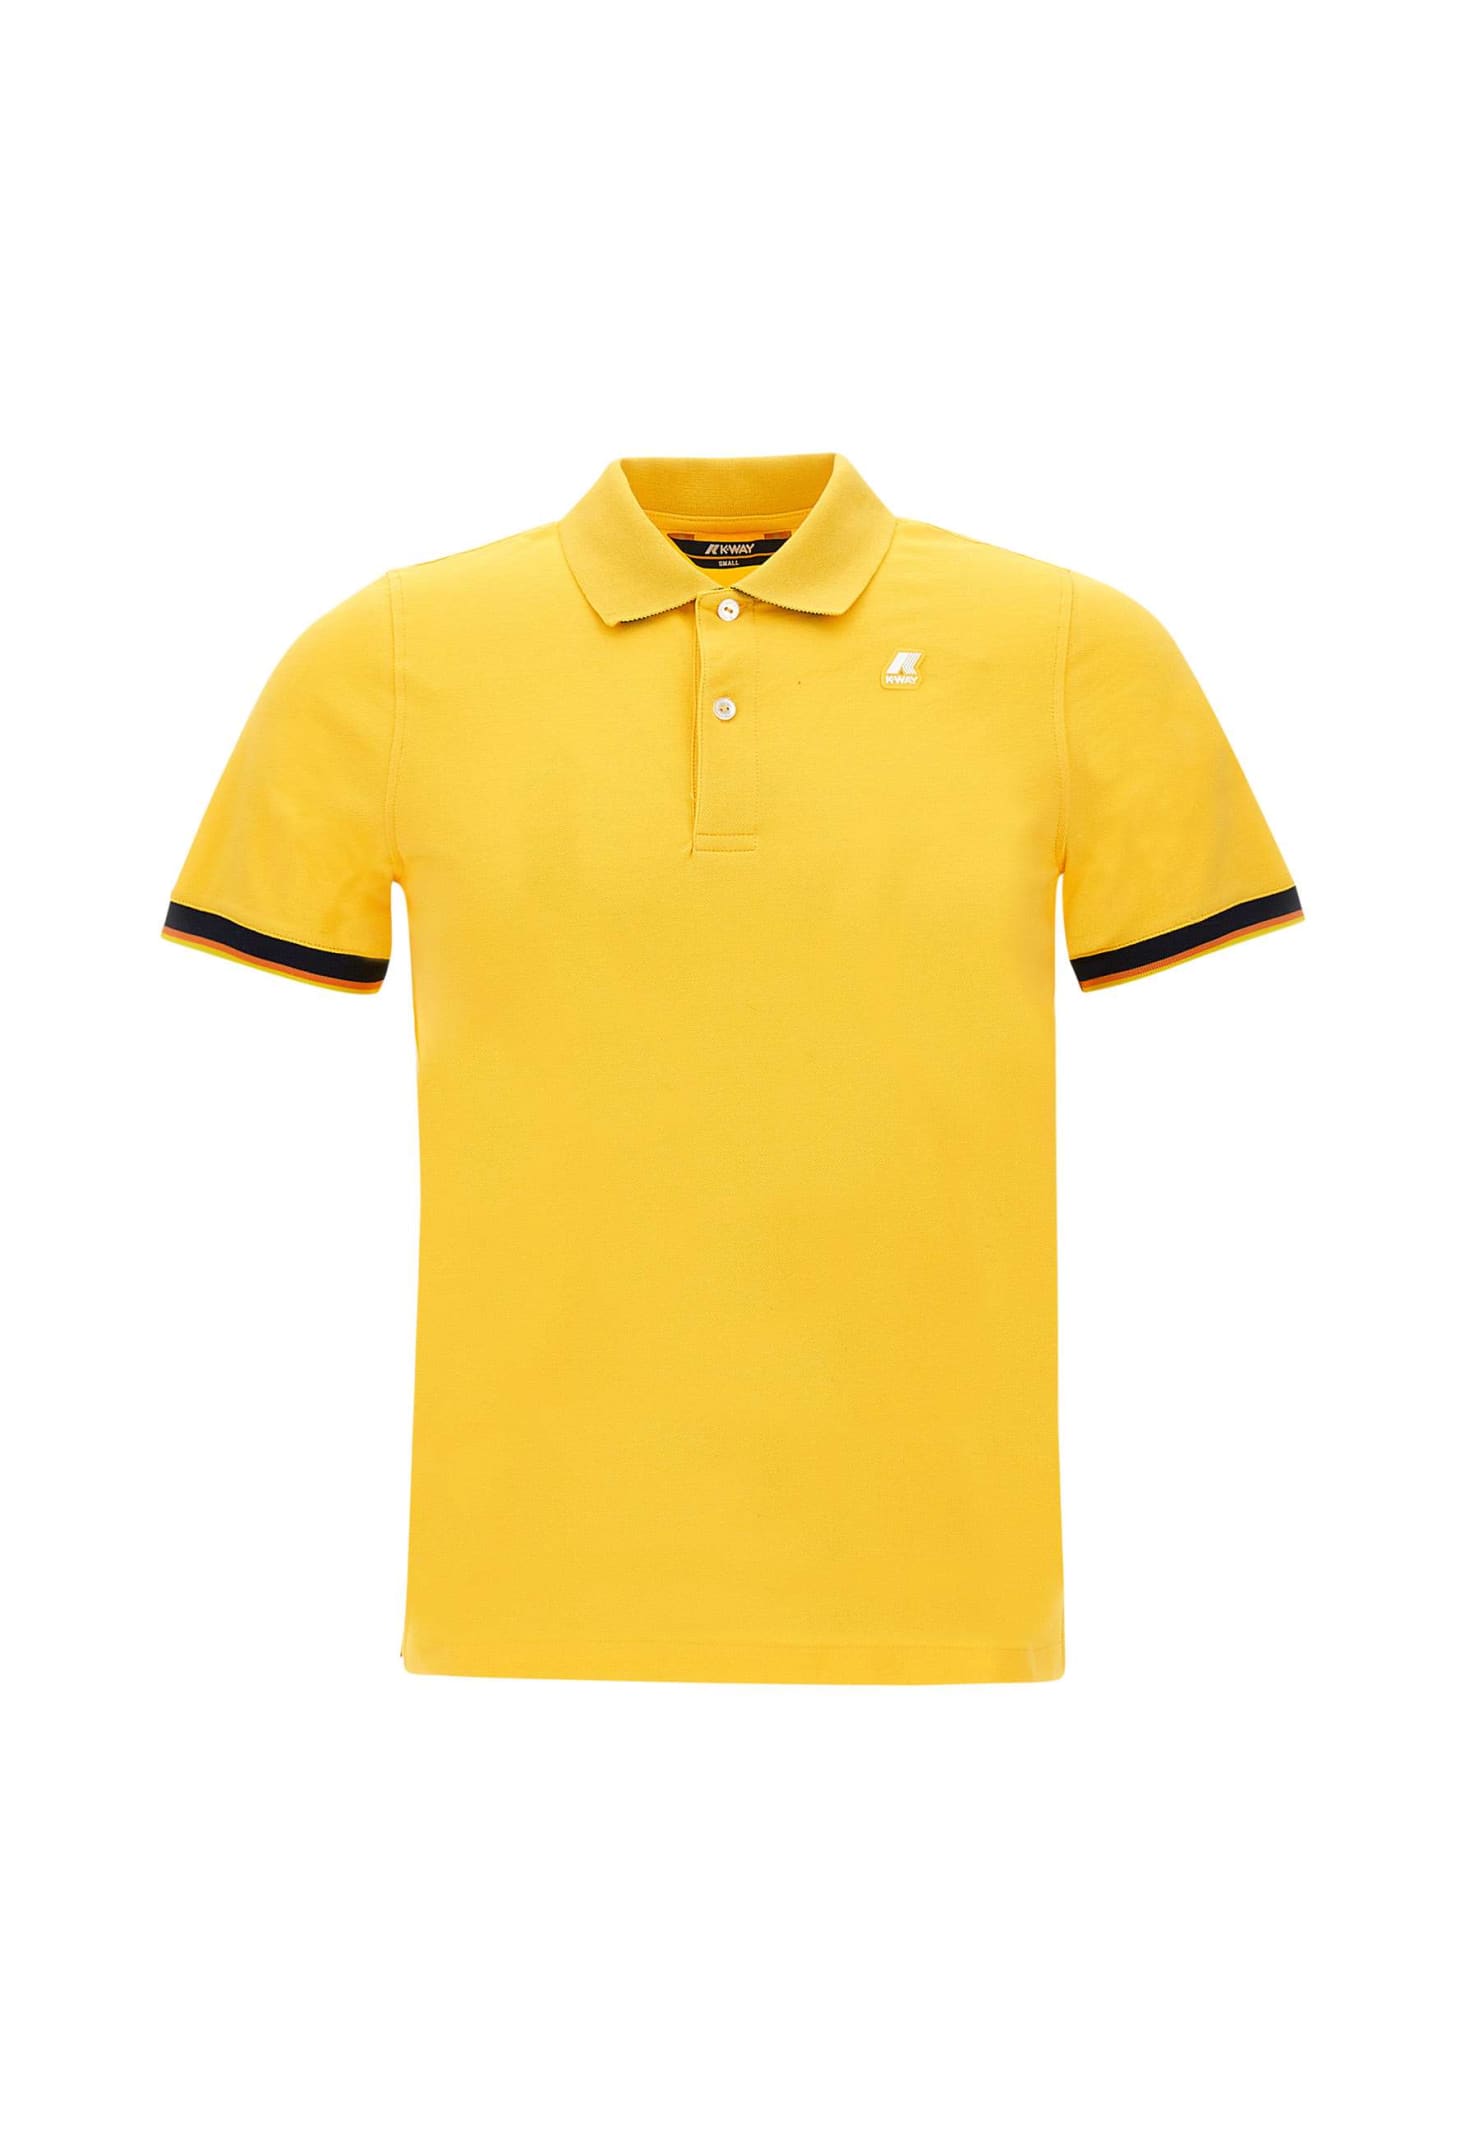 K-way Vincent Cotton Polo Shirt In Yellow Sunstruck